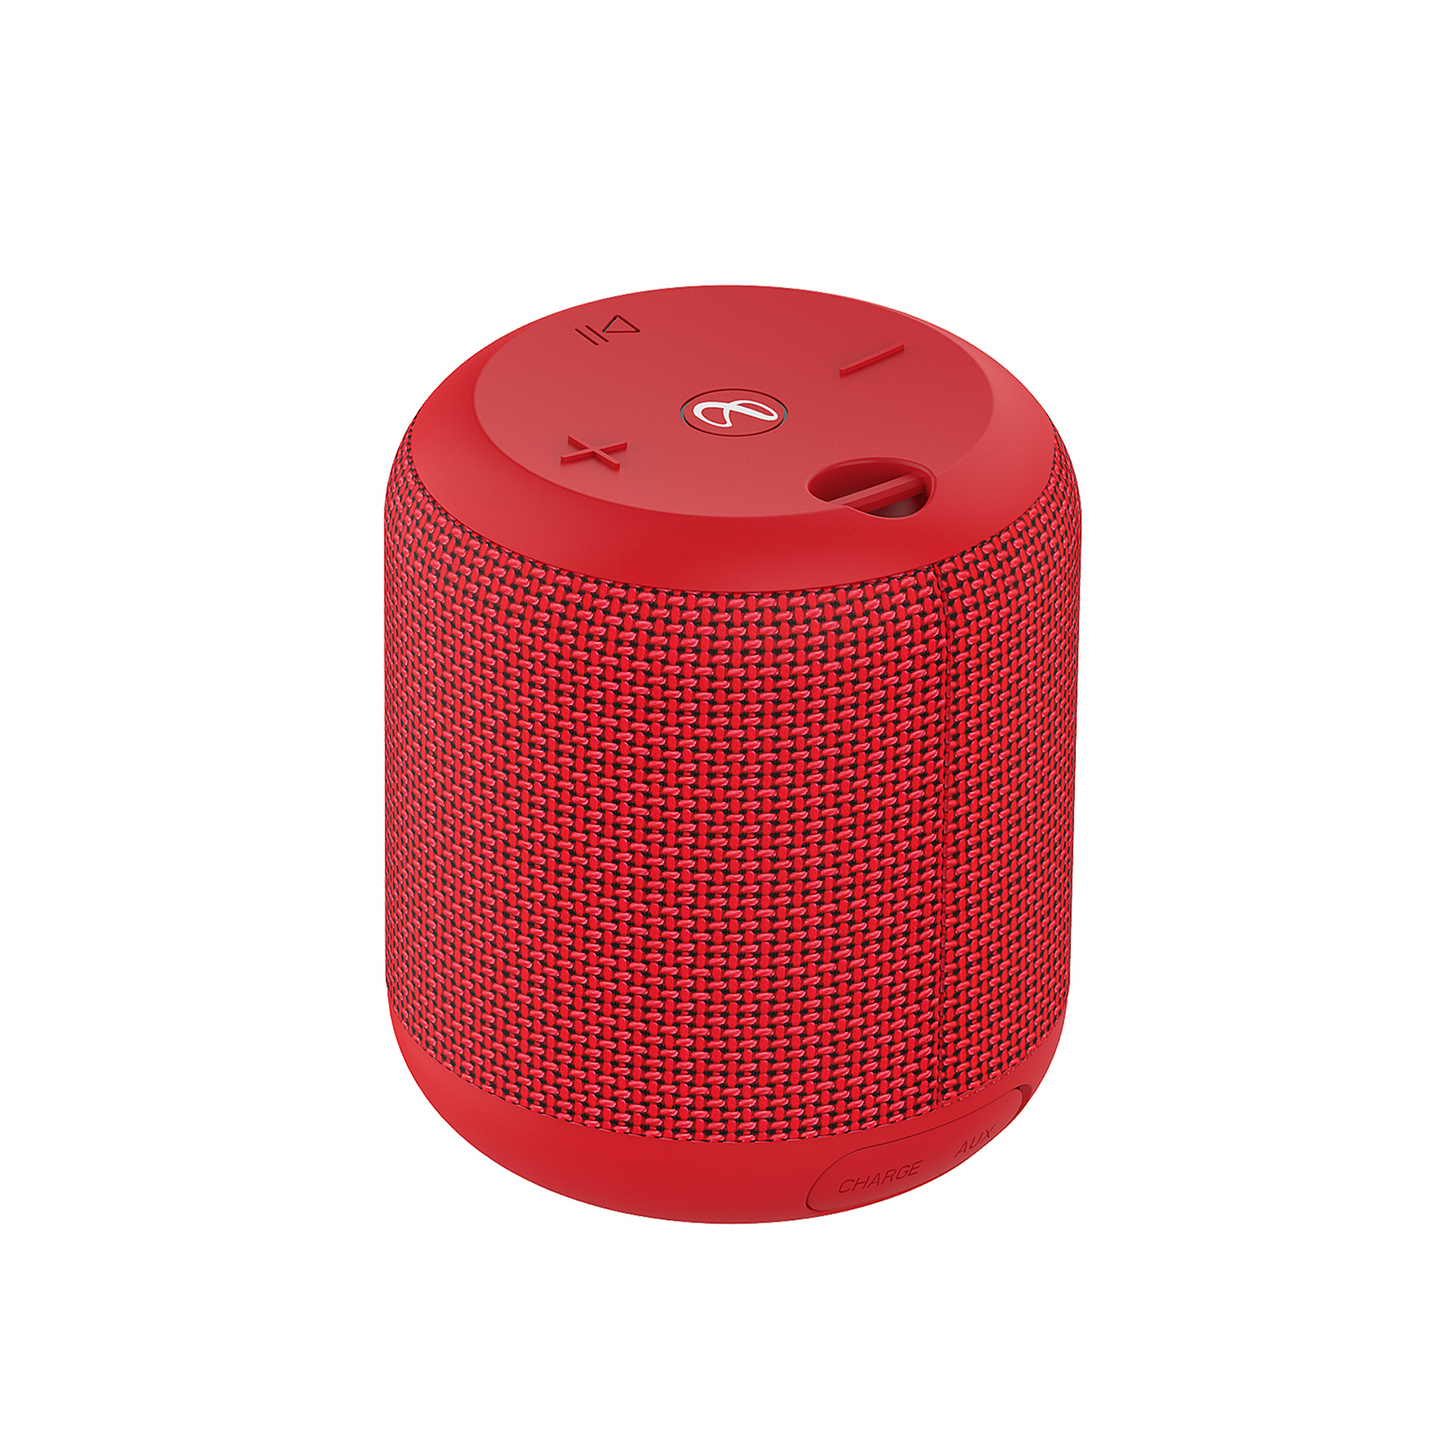 Infinity CLUBZ 150 Bluetooth Speakers (Red)